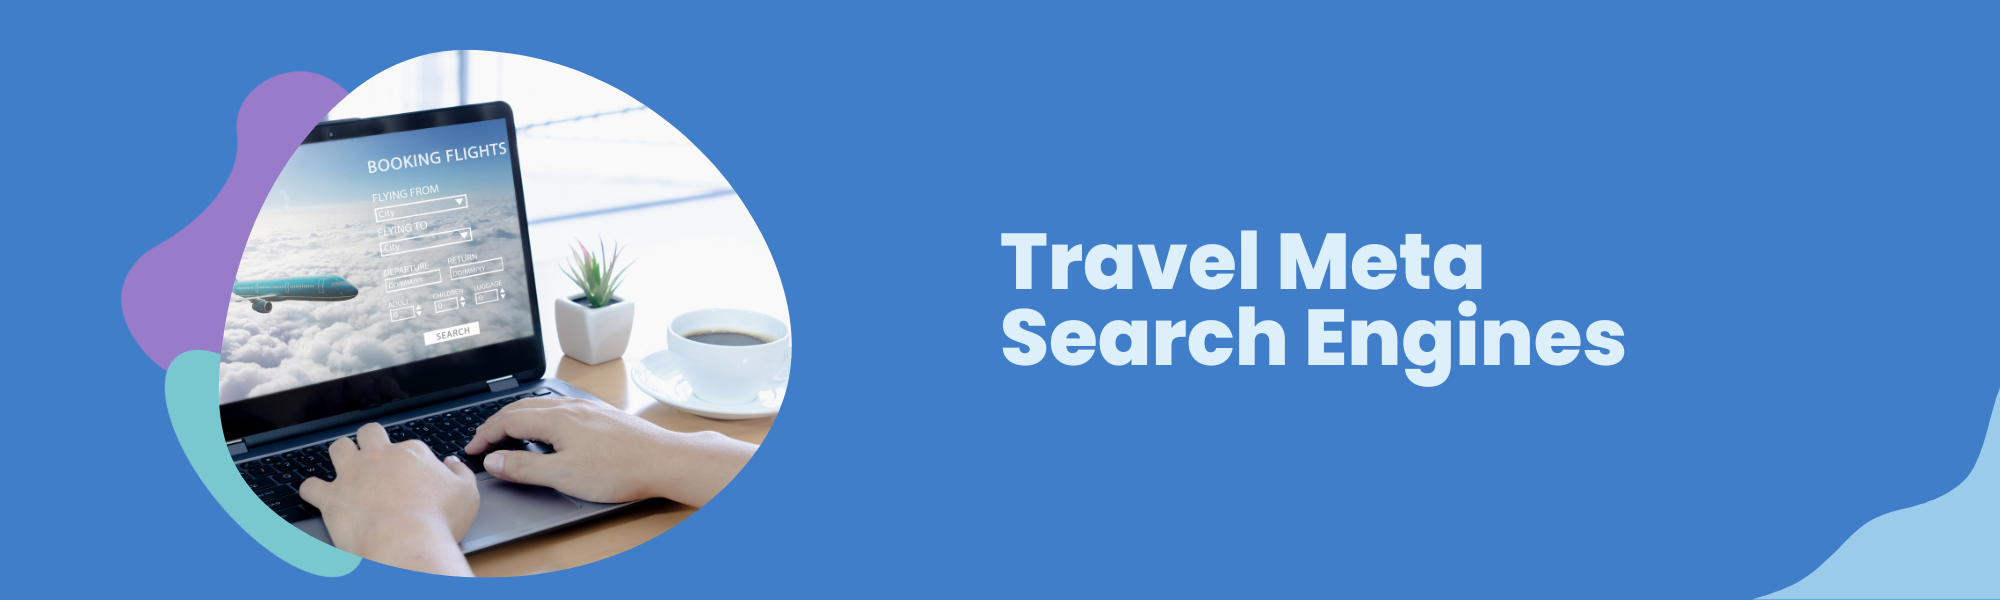 travel search engines advantages